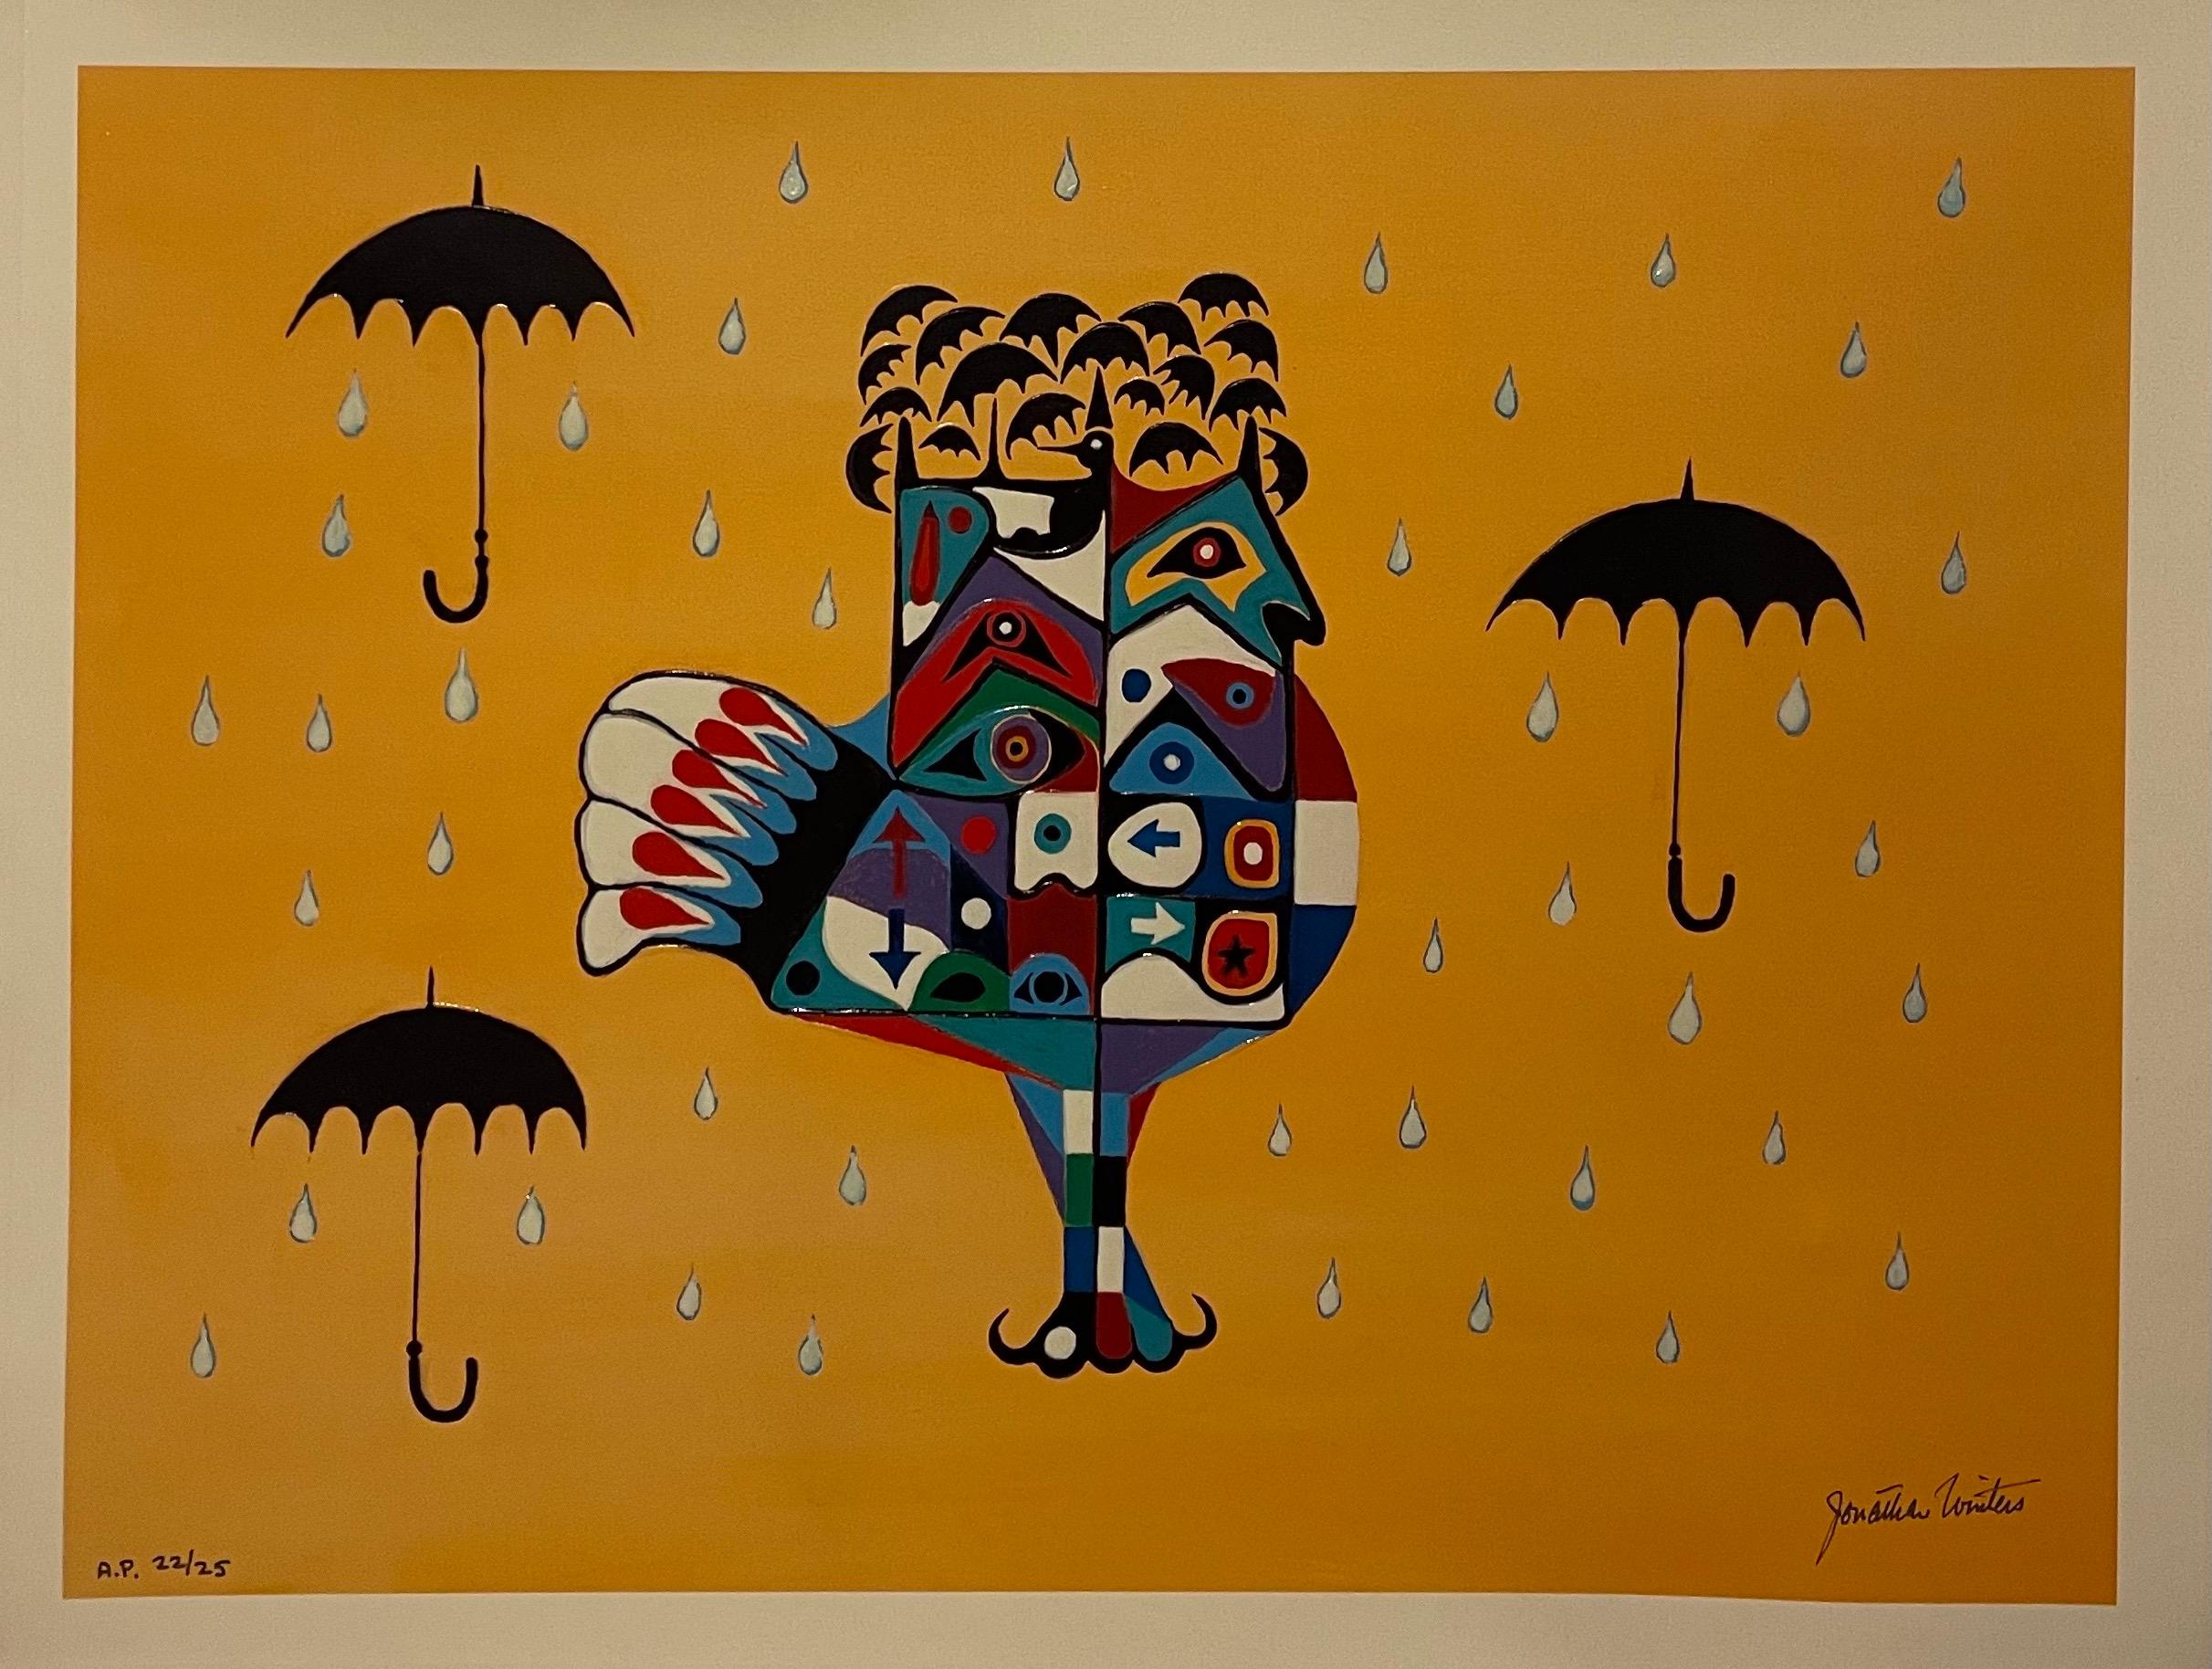 Overall 21 X 27 image is 17.25 X 23.5

This is a mixed media print on canvas by beloved comedian and artist Jonathan Winters. 
This one depicts a surrealist bird with umbrellas
Artist: Jonathan Winters 
Medium: Mixed media print on canvas; hand